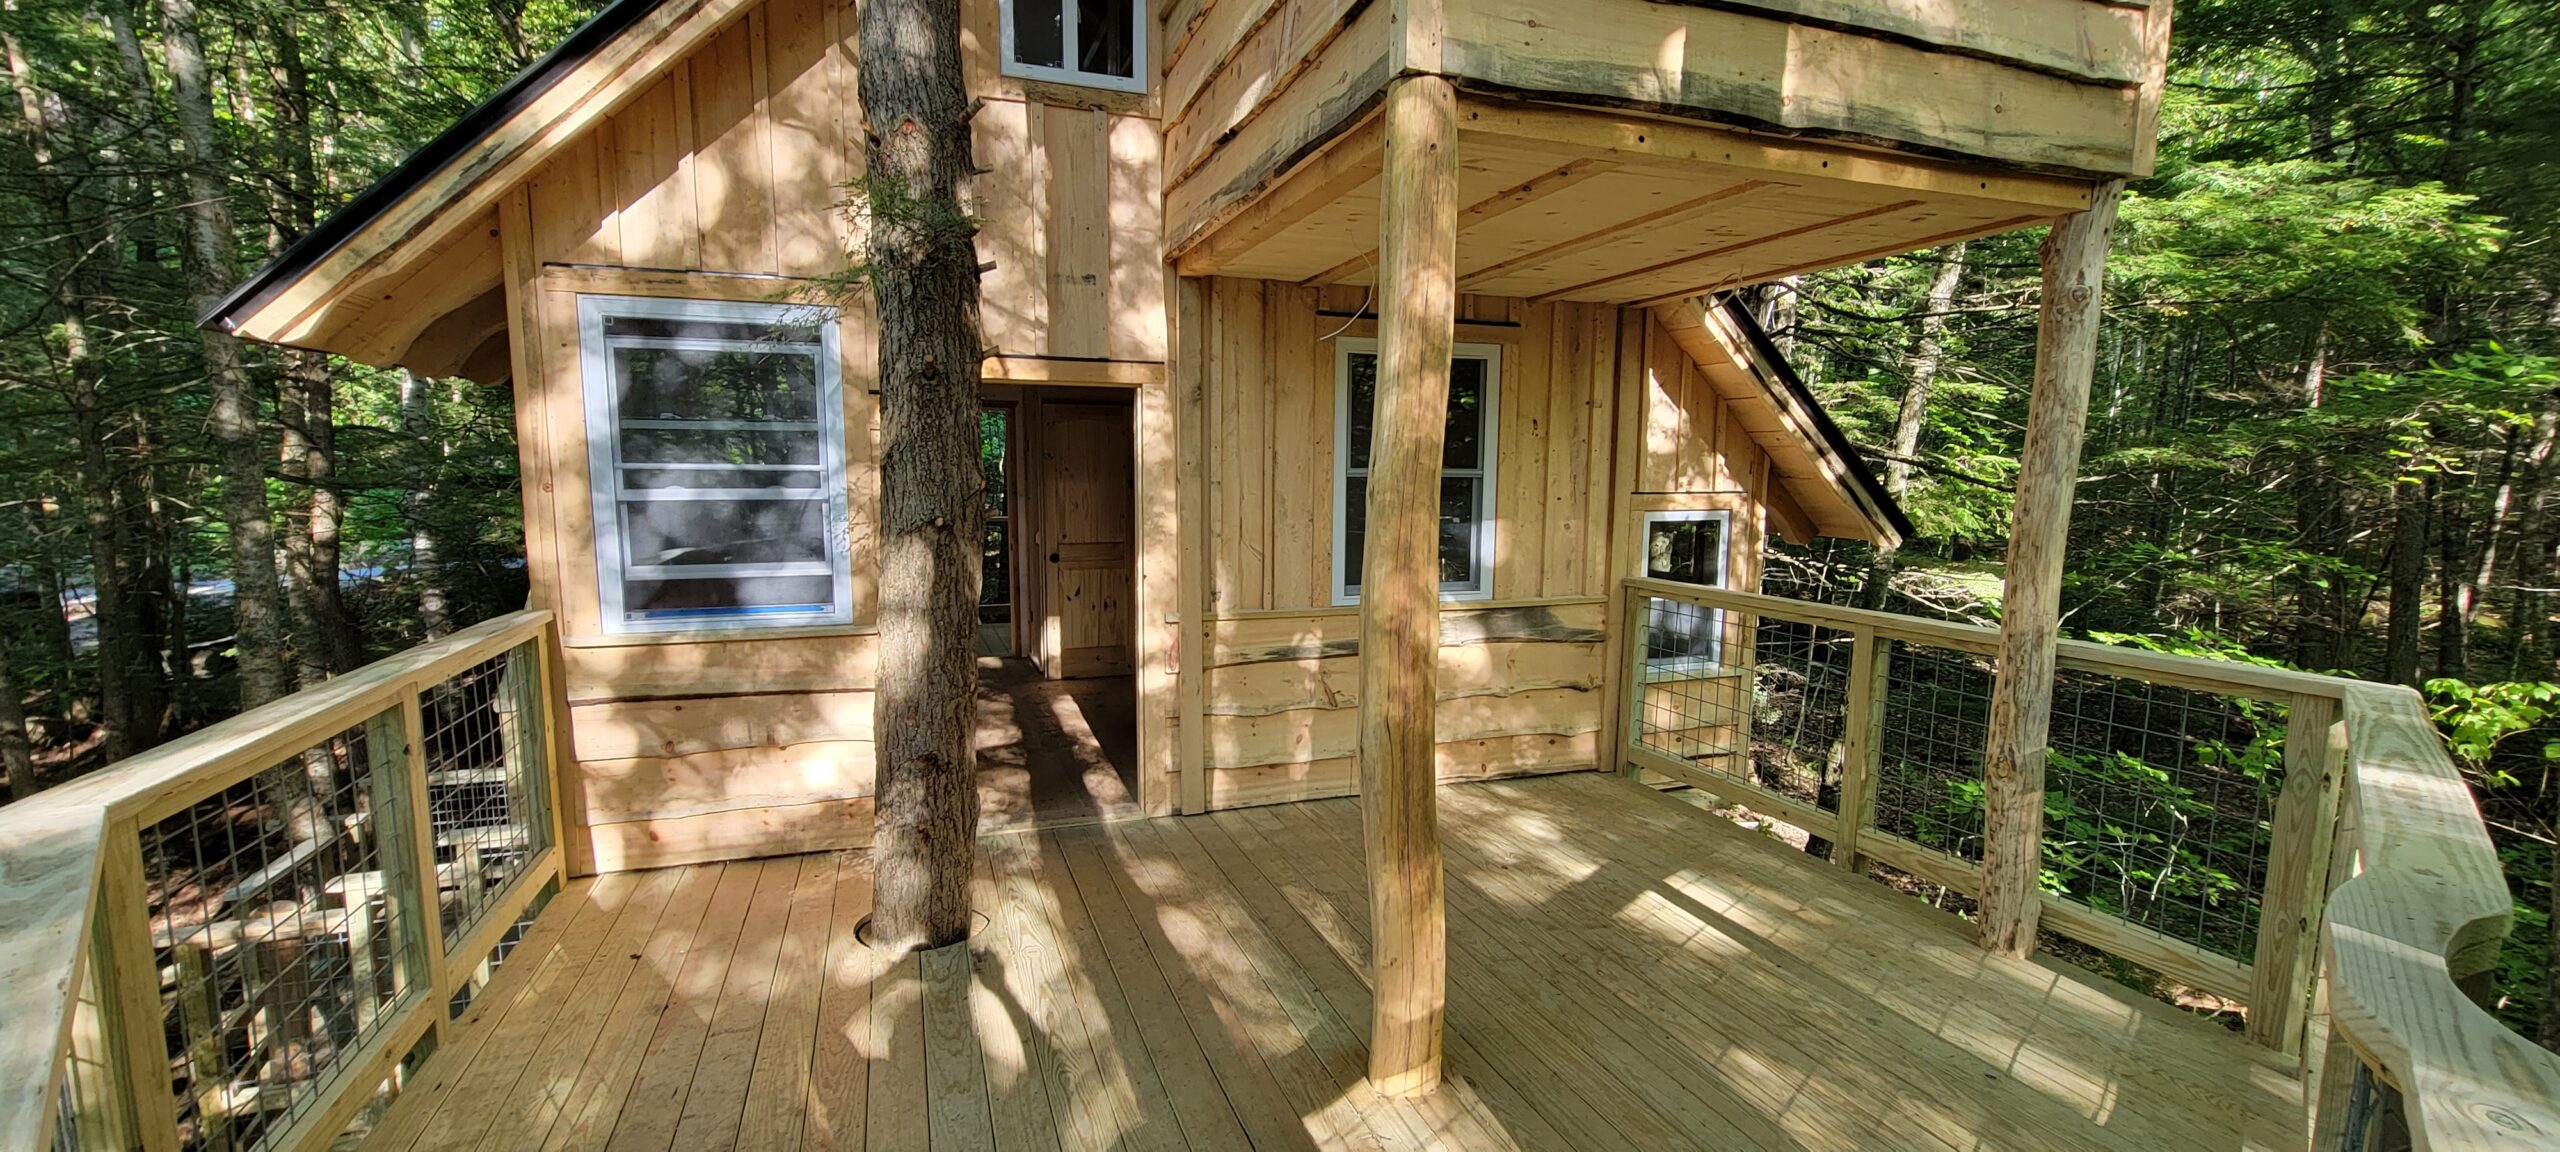 This luxury treehouse rental provides the perfect outdoor space for year-round enjoyment!